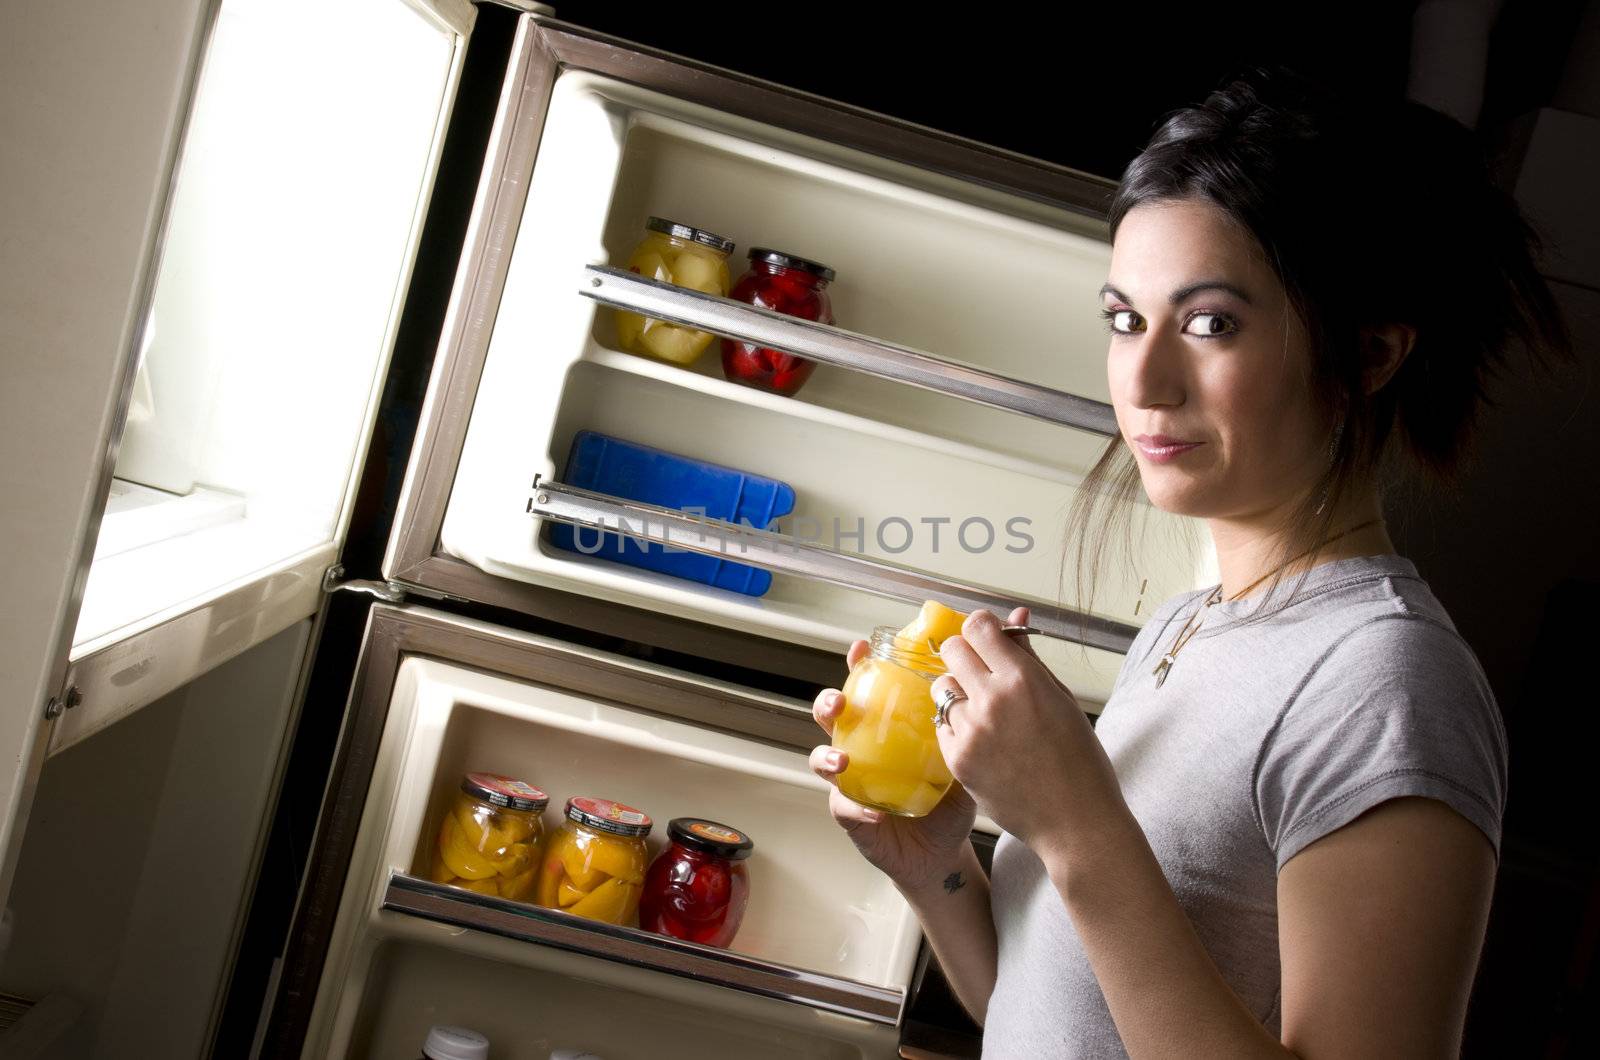 A sleepy woman lingers at the refrigerator door and gets suprised when you catch her nibbling outside her diet plan